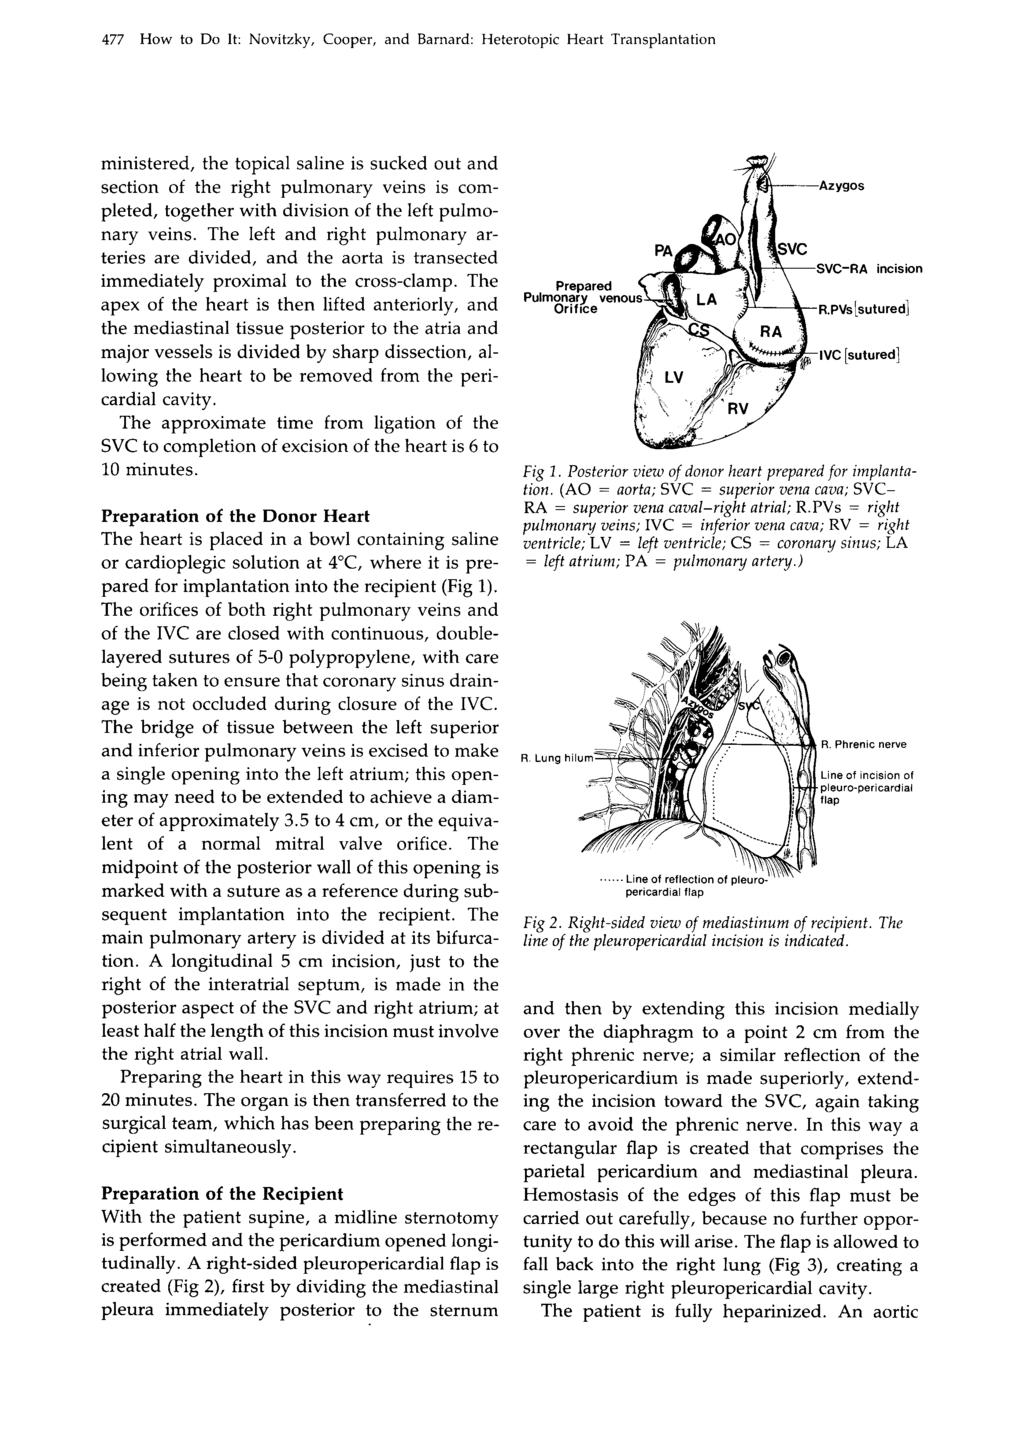 477 How to Do It: Novitzky, Cooper, and Barnard: Heterotopic Heart Transplantation ministered, the topical saline is sucked out and section of the right pulmonary veins is completed, together with